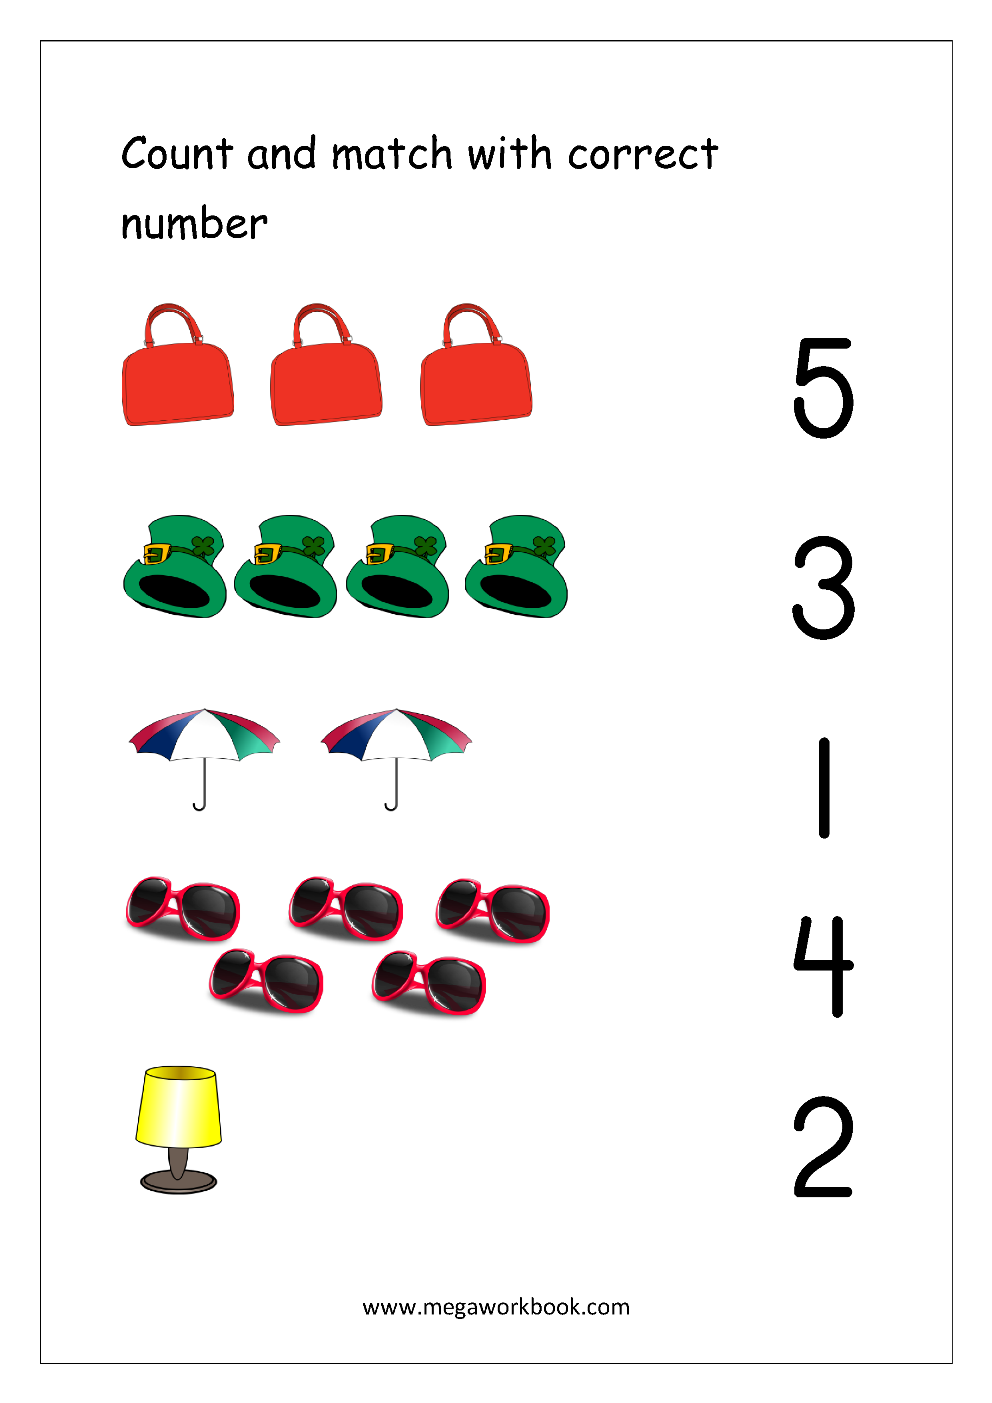 Free Printable Number Matching Worksheets For Kindergarten And Preschool Count And Match 1 10 